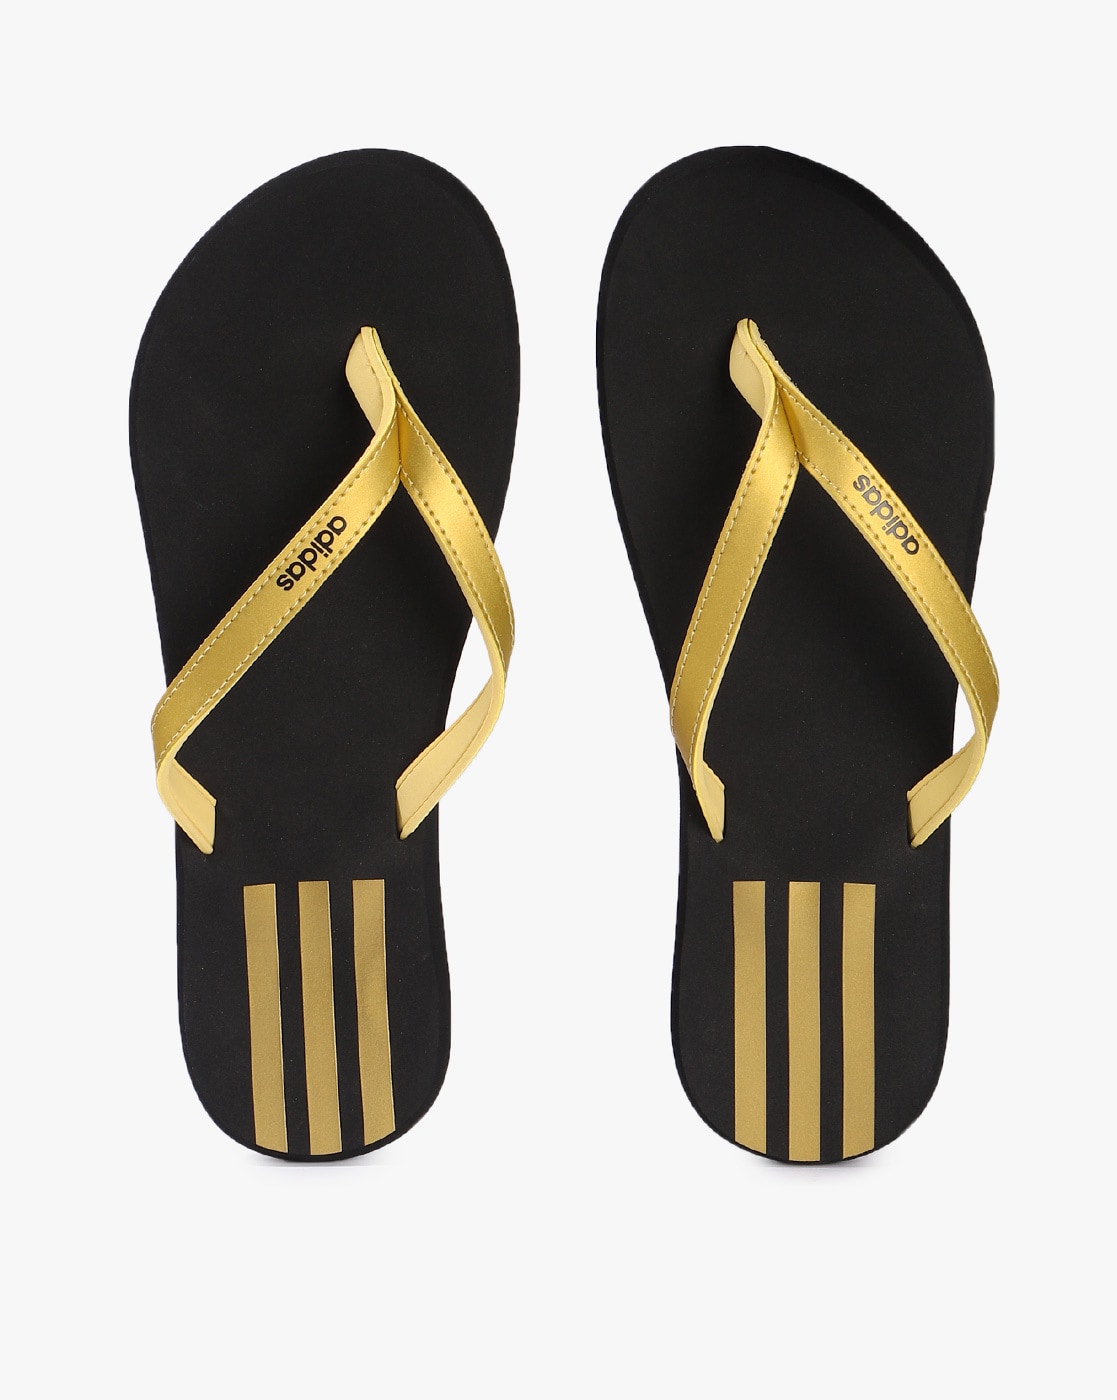 Buy Gold Flip Flop Slippers for by Online | Ajio.com